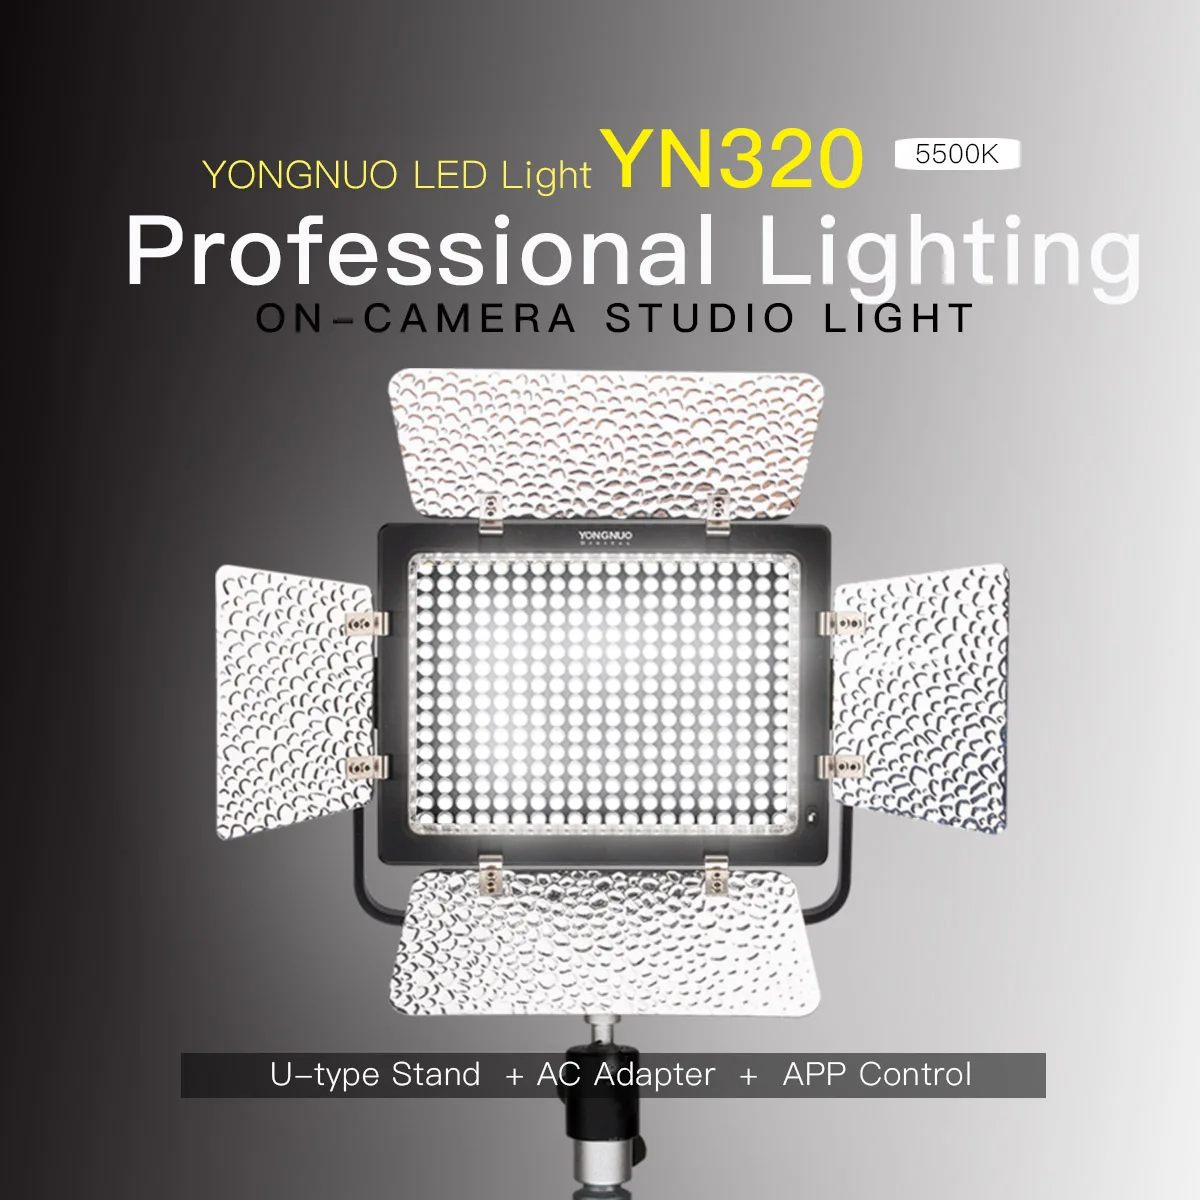 

YONGNUO YN320 Professional LED Photography Video Light 5500K Studio Panel Lamp with APP Control for Canon Nikon Sony DSLR